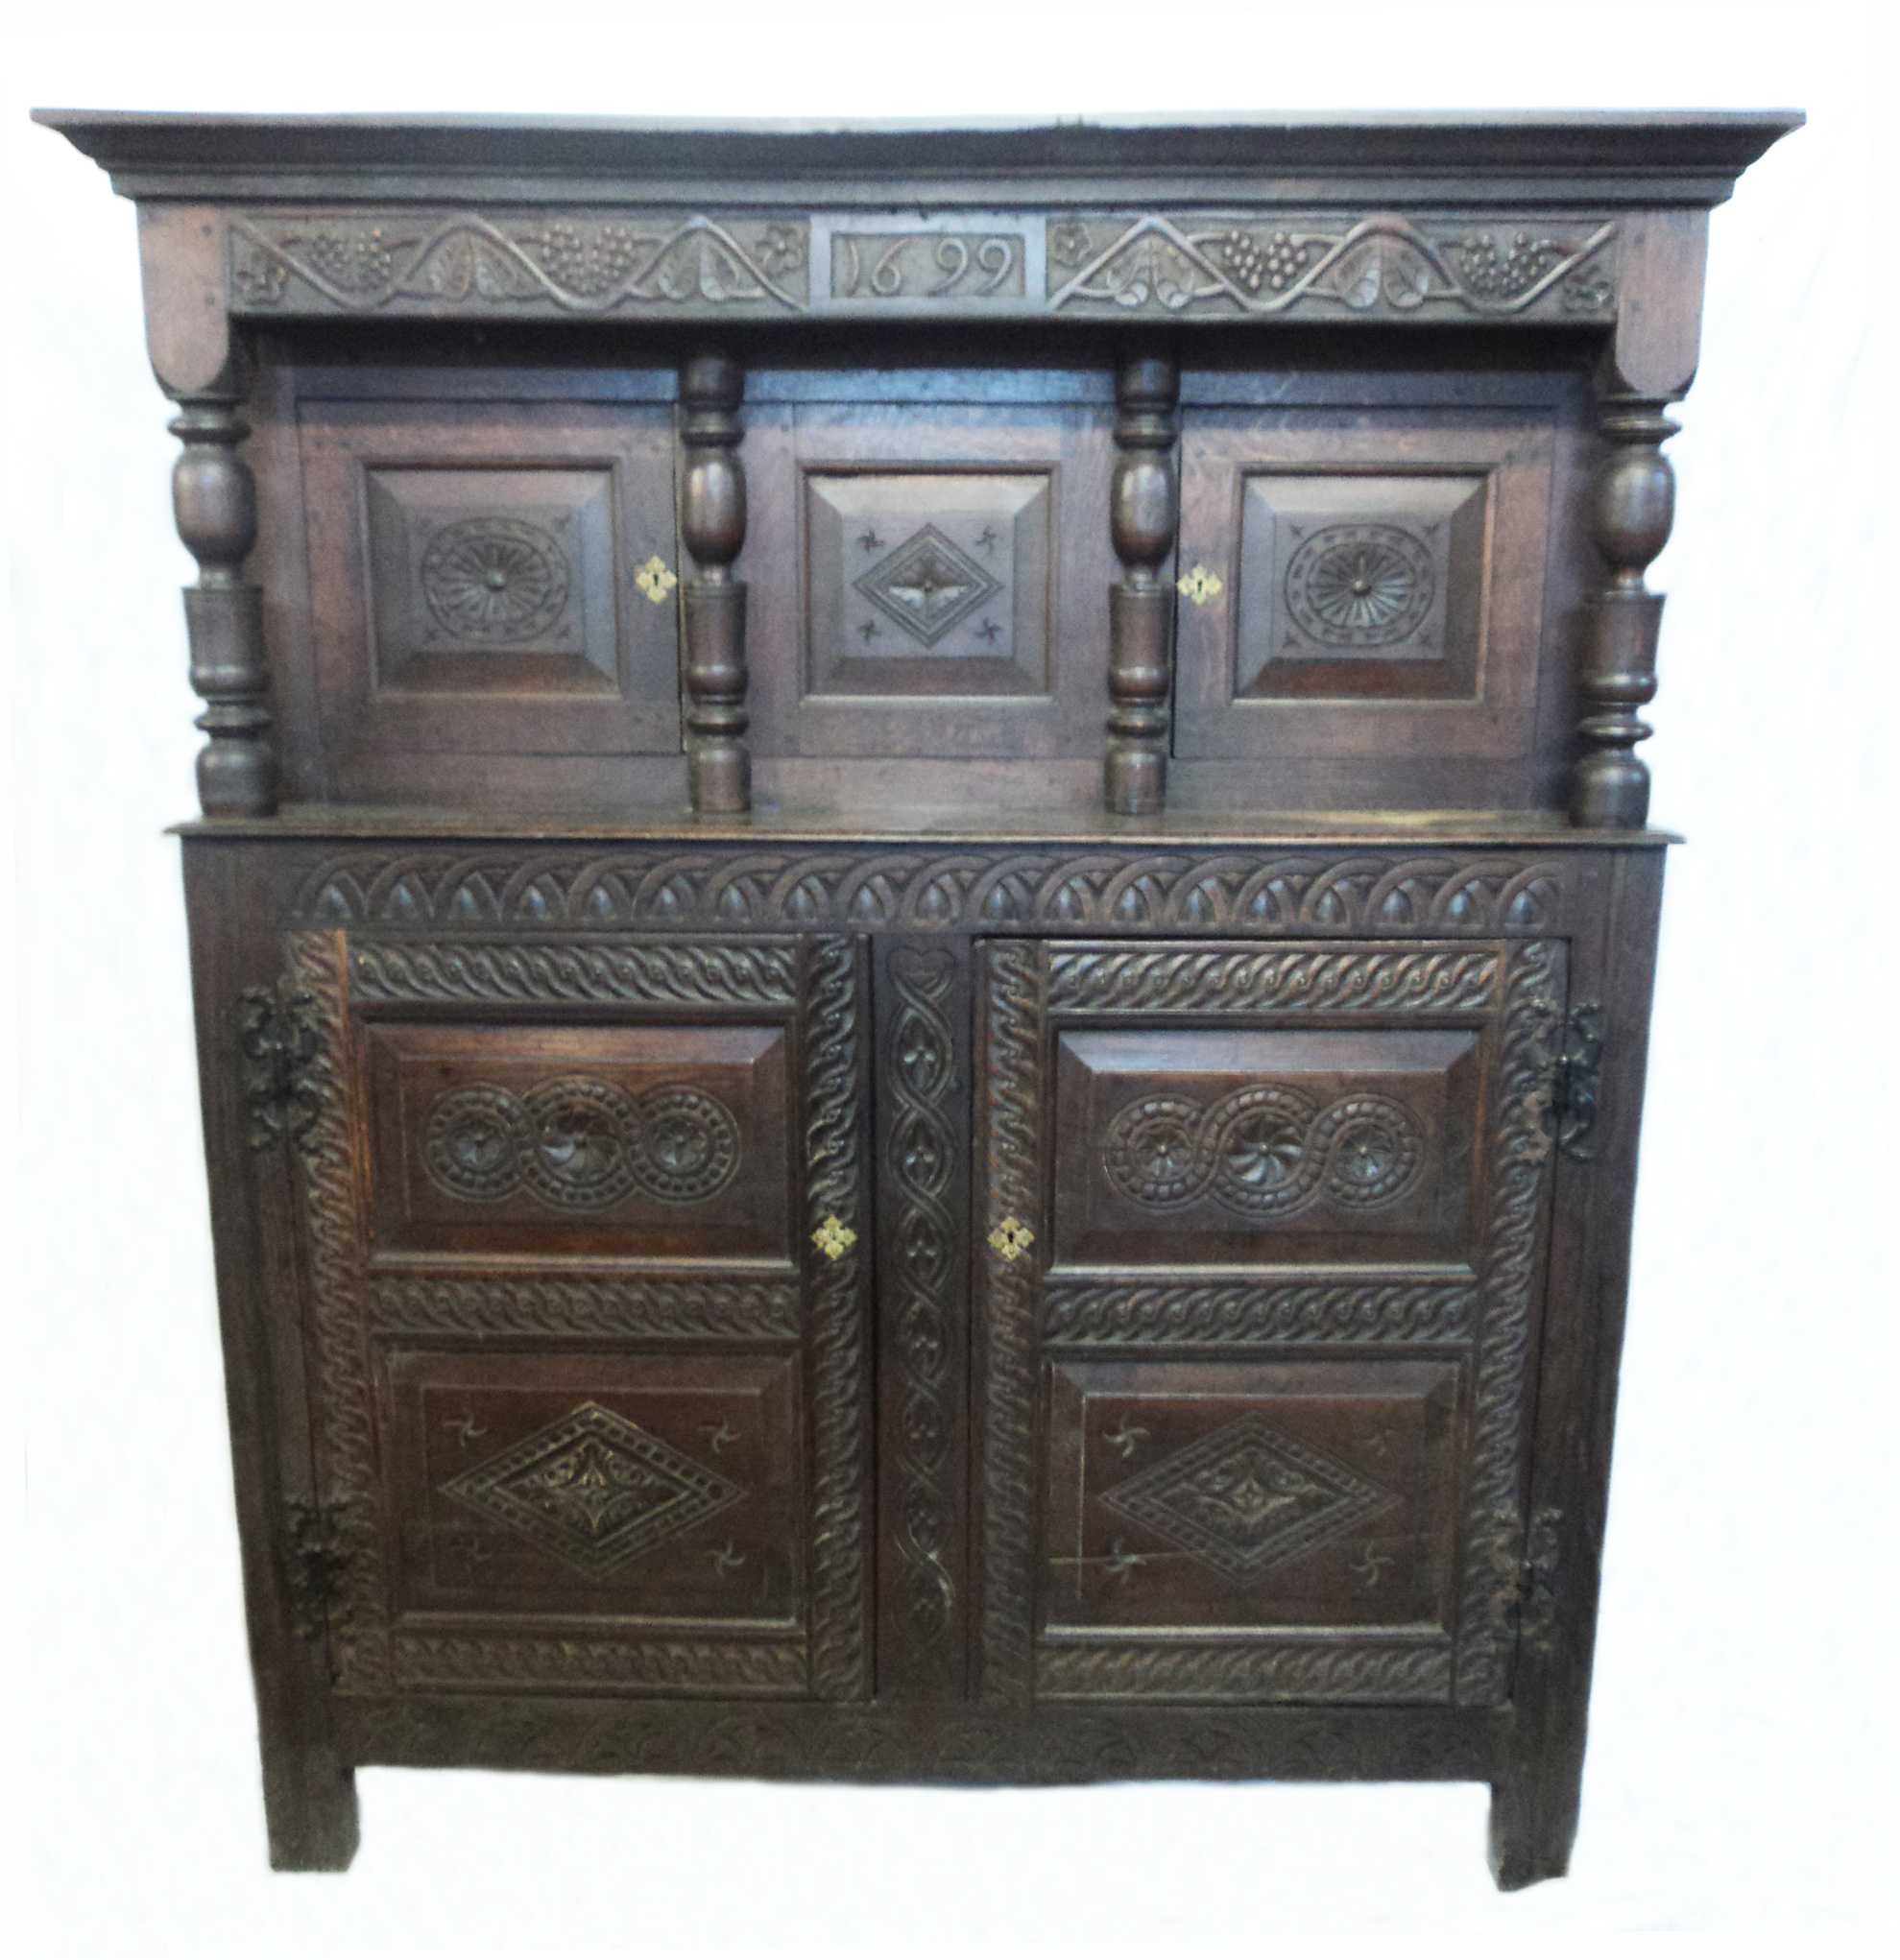 A 4’7” antique oak court cupboard with decorative carved frieze dated 1699, secret central drawers